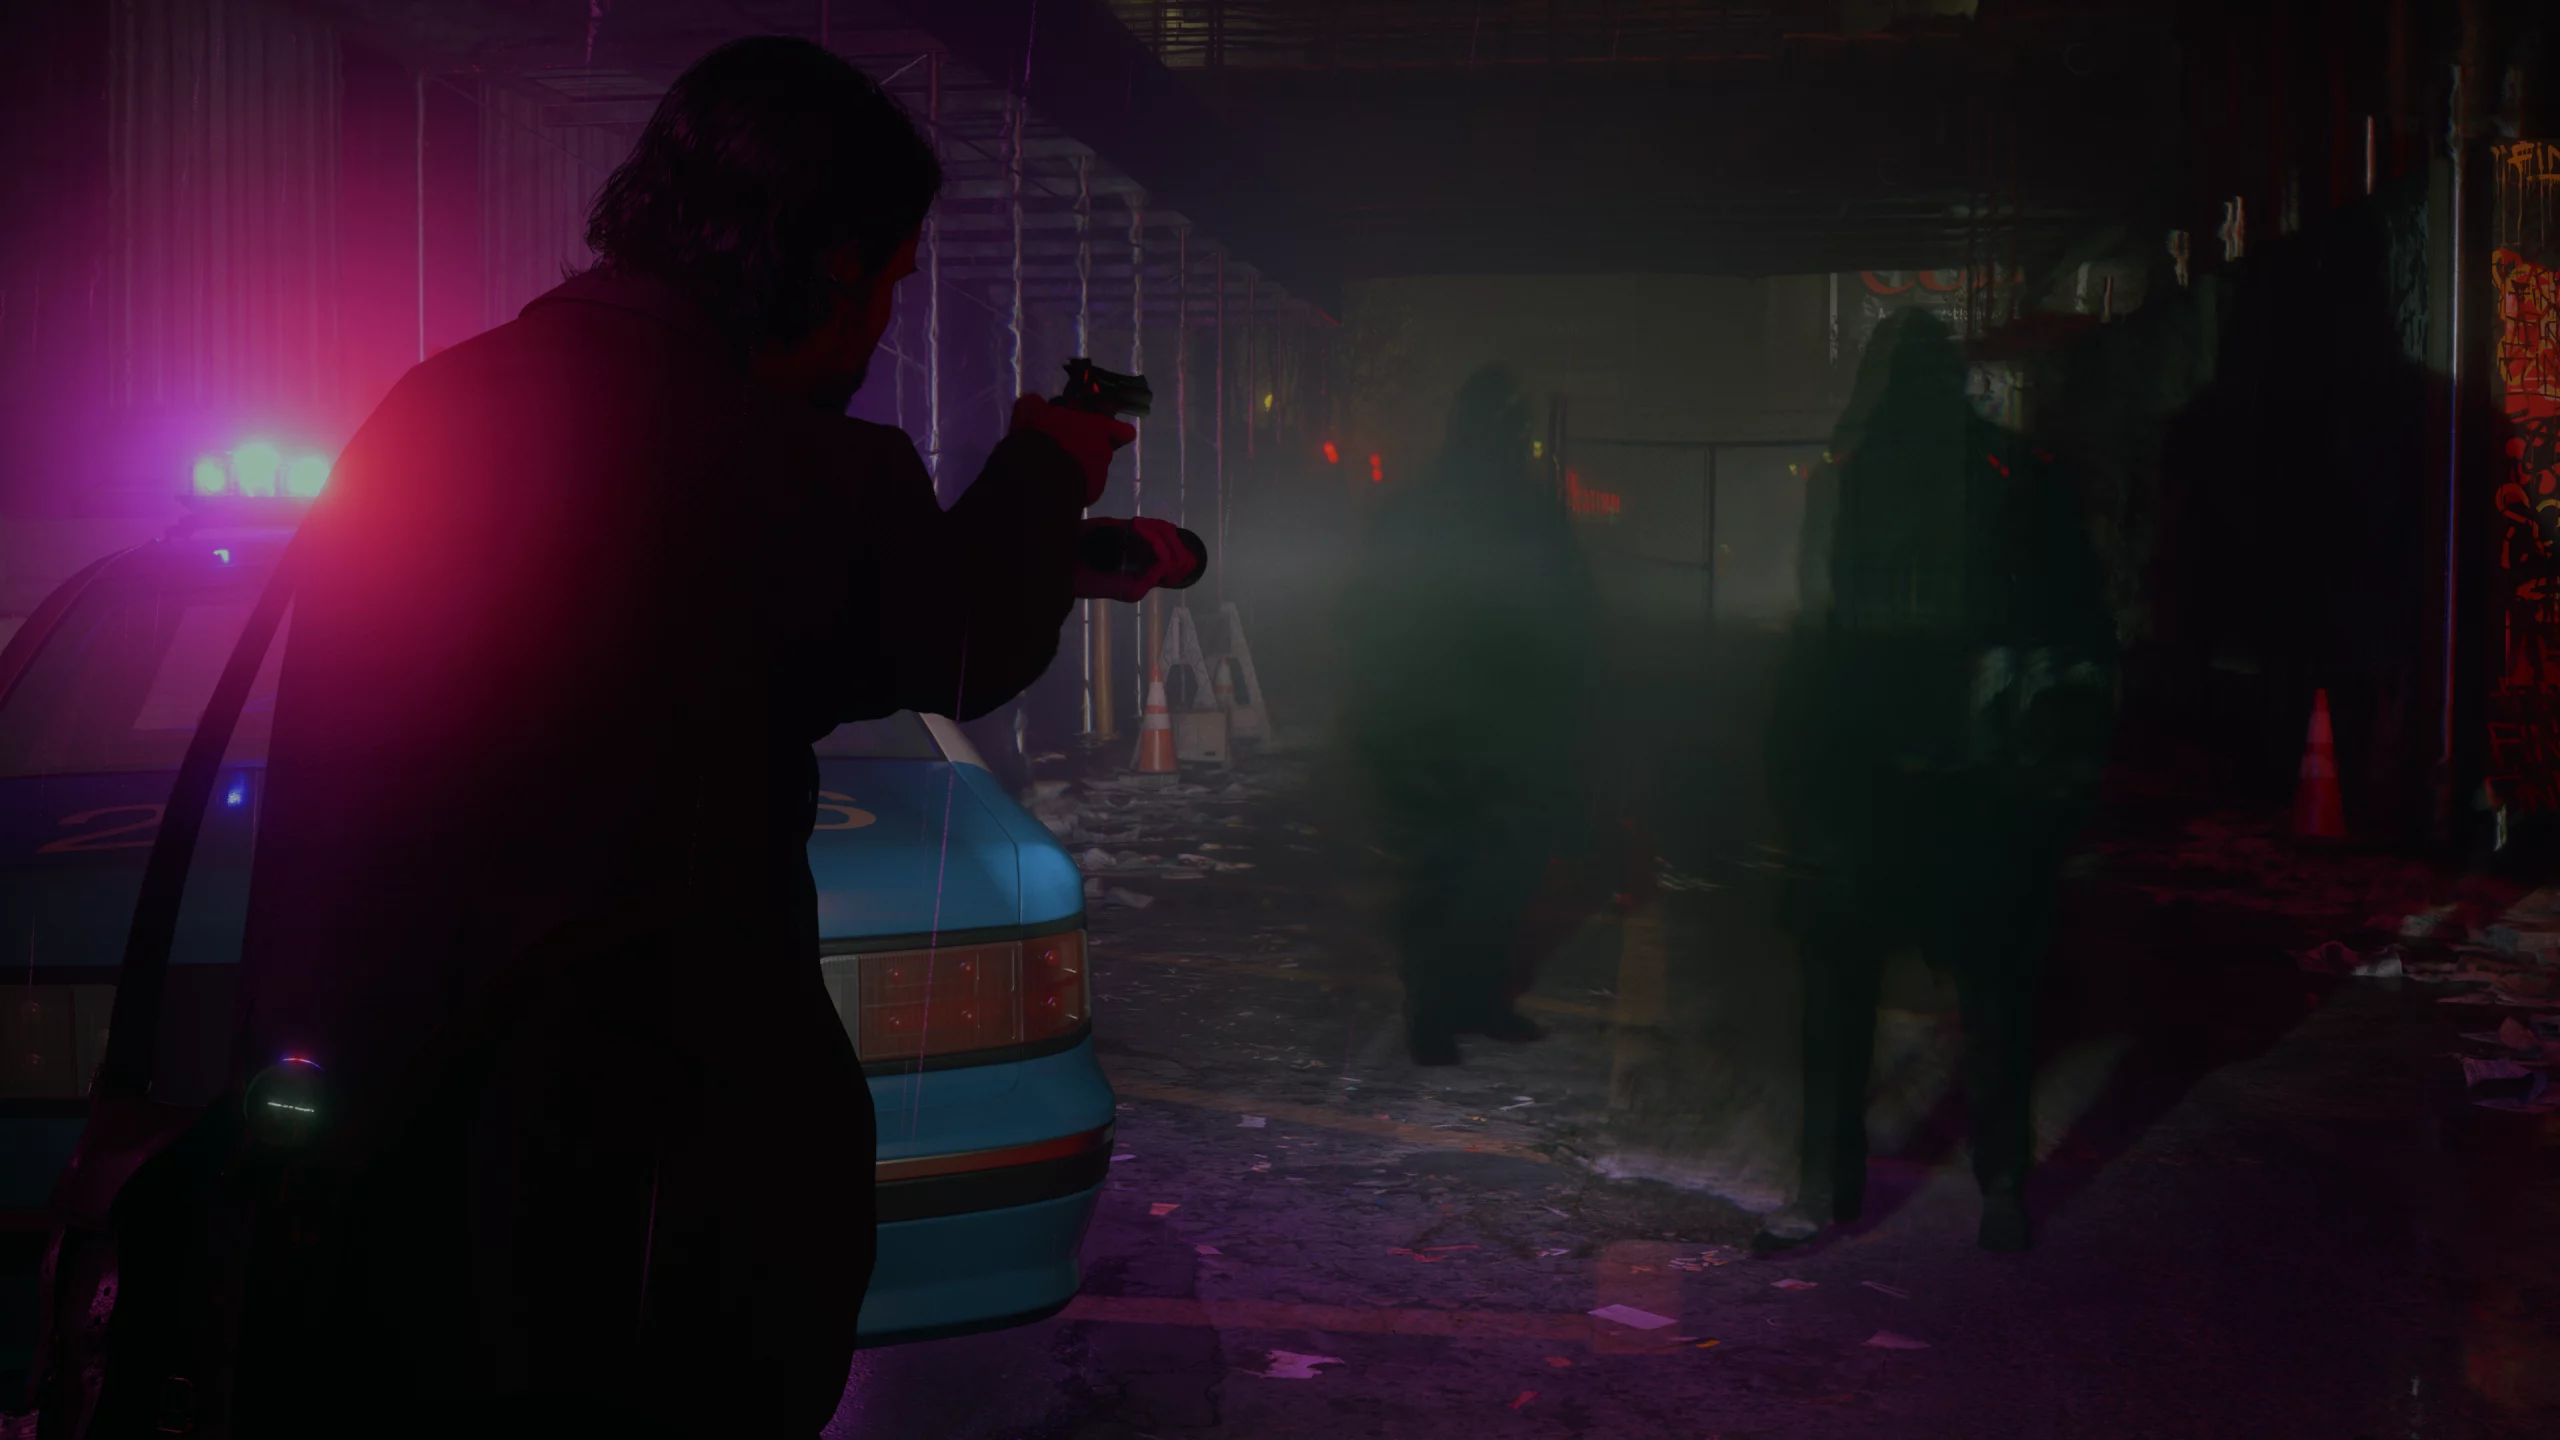 Alan Wake 2: What To Expect From Remedy's Survival Horror Sequel